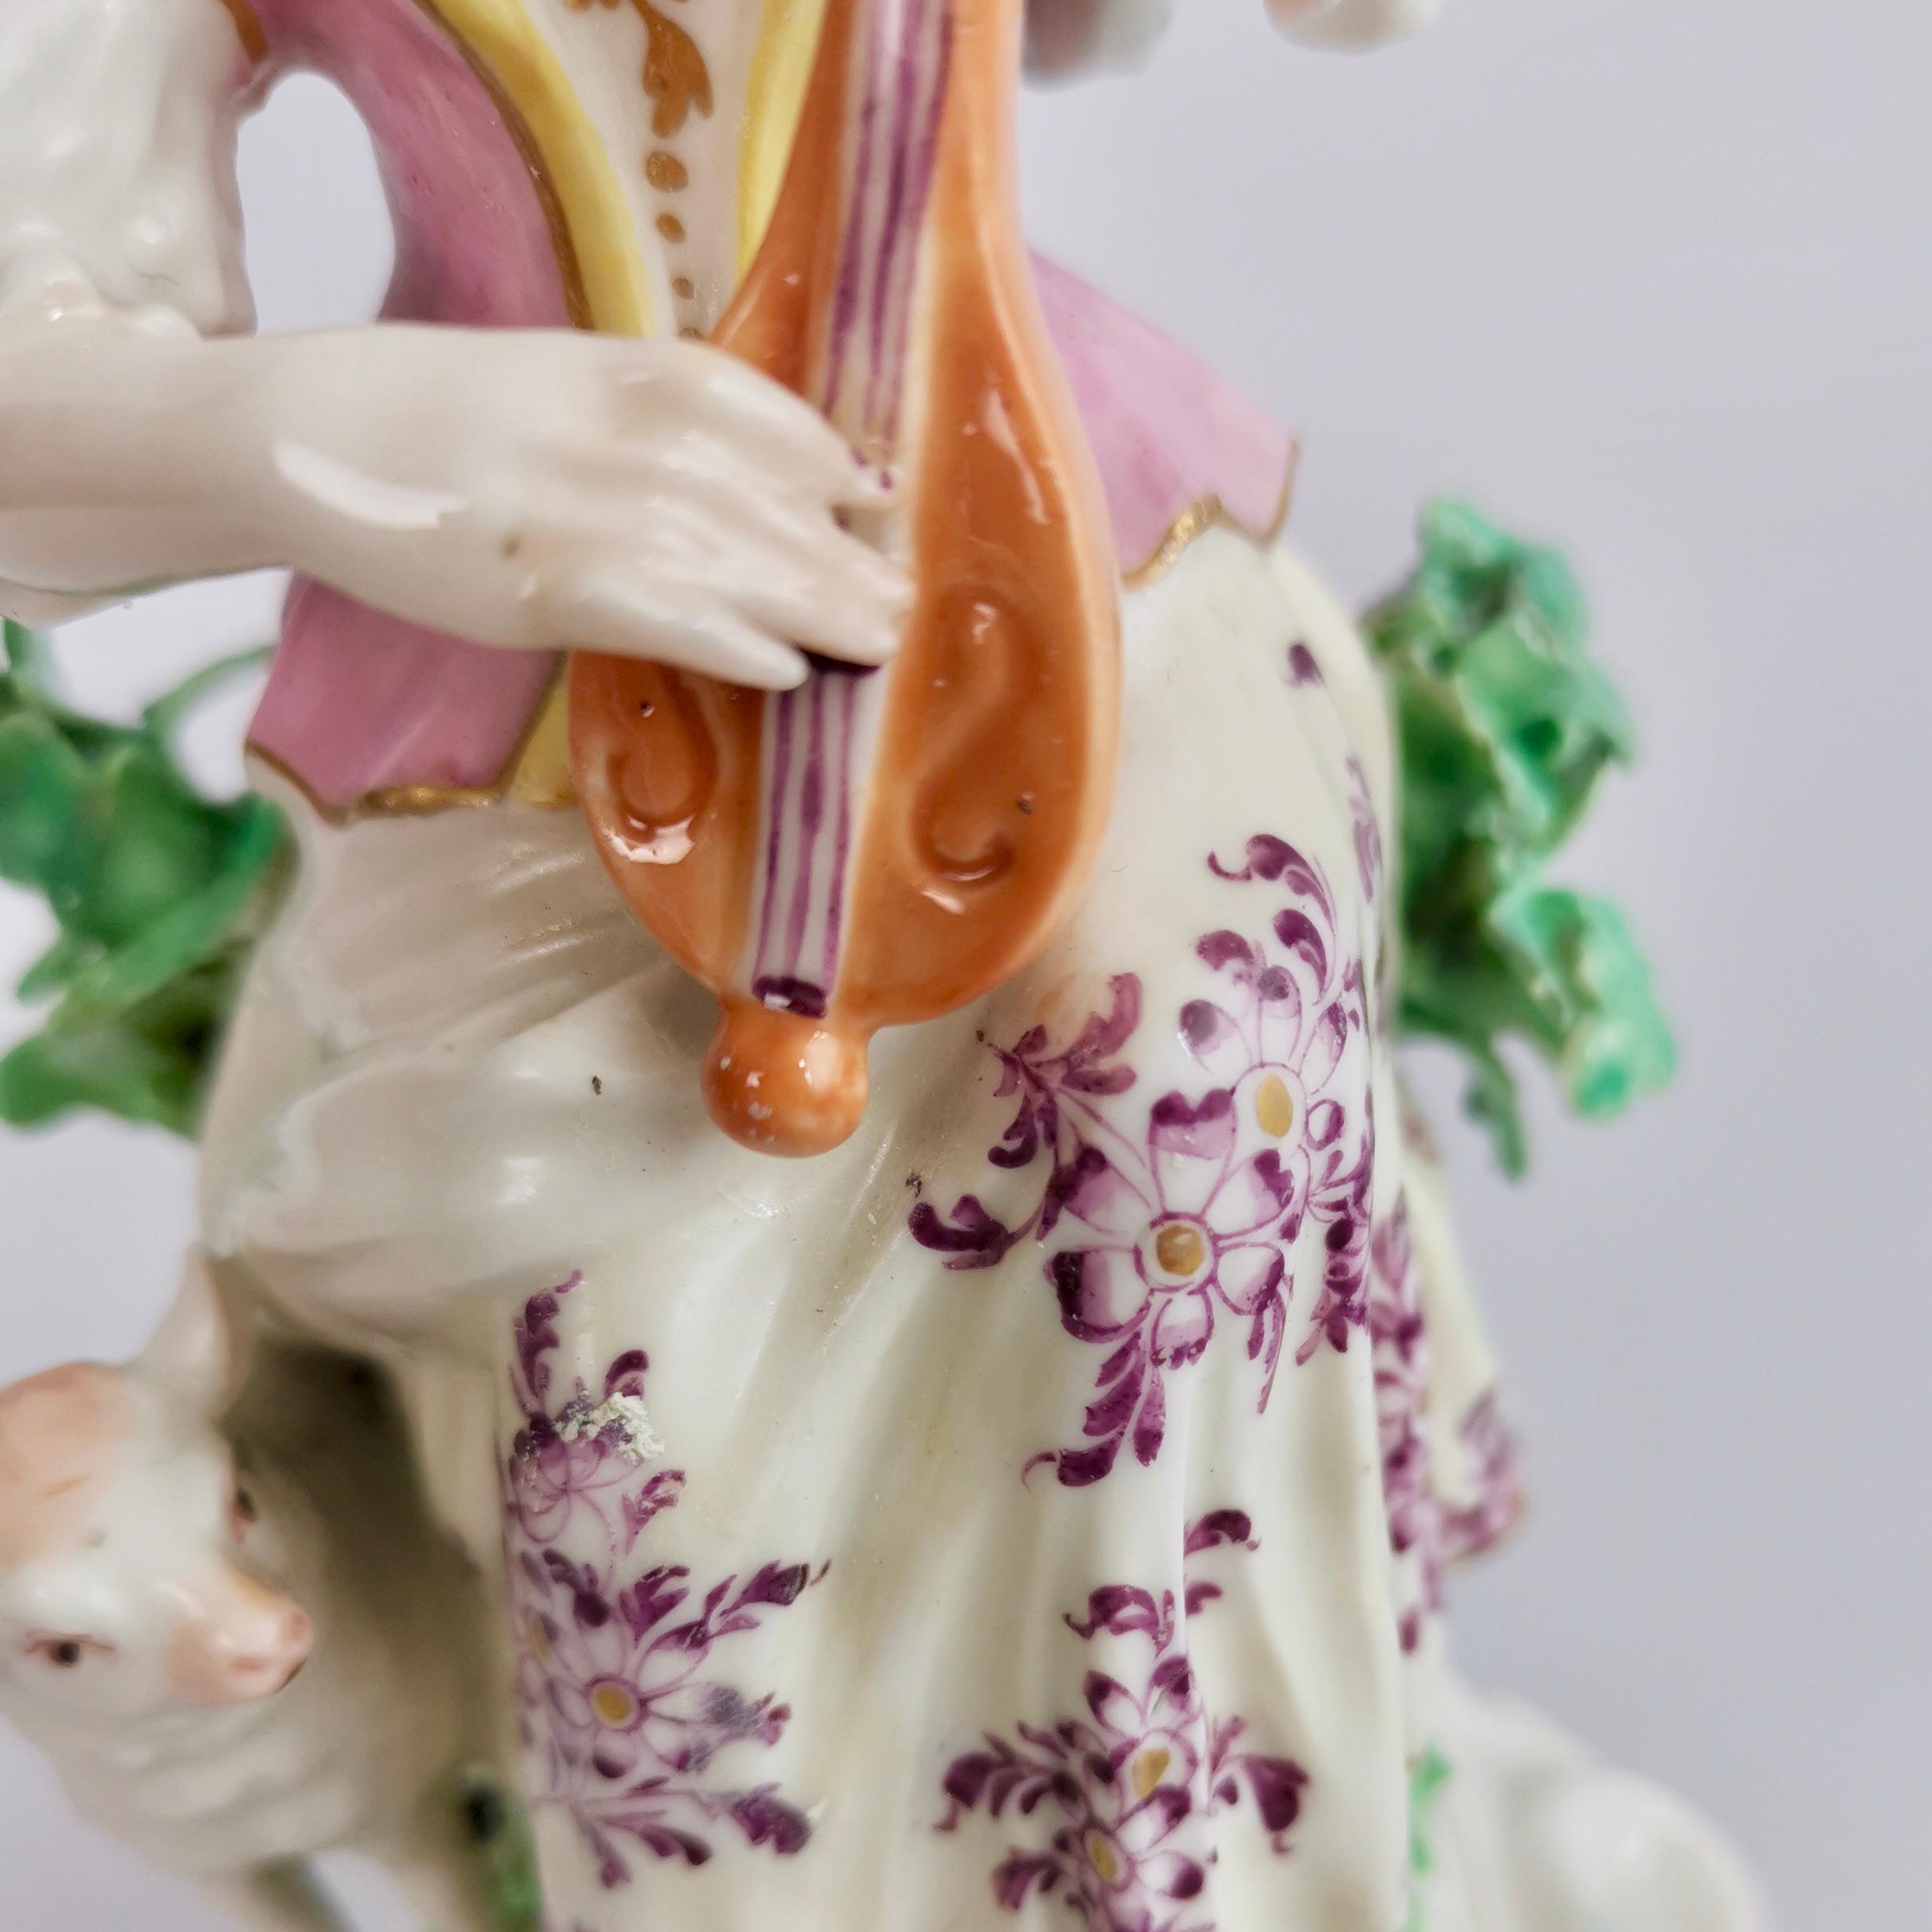 Chelsea-Derby Porcelain Figure of Lady with Lute, 18th Century, circa 1770 5